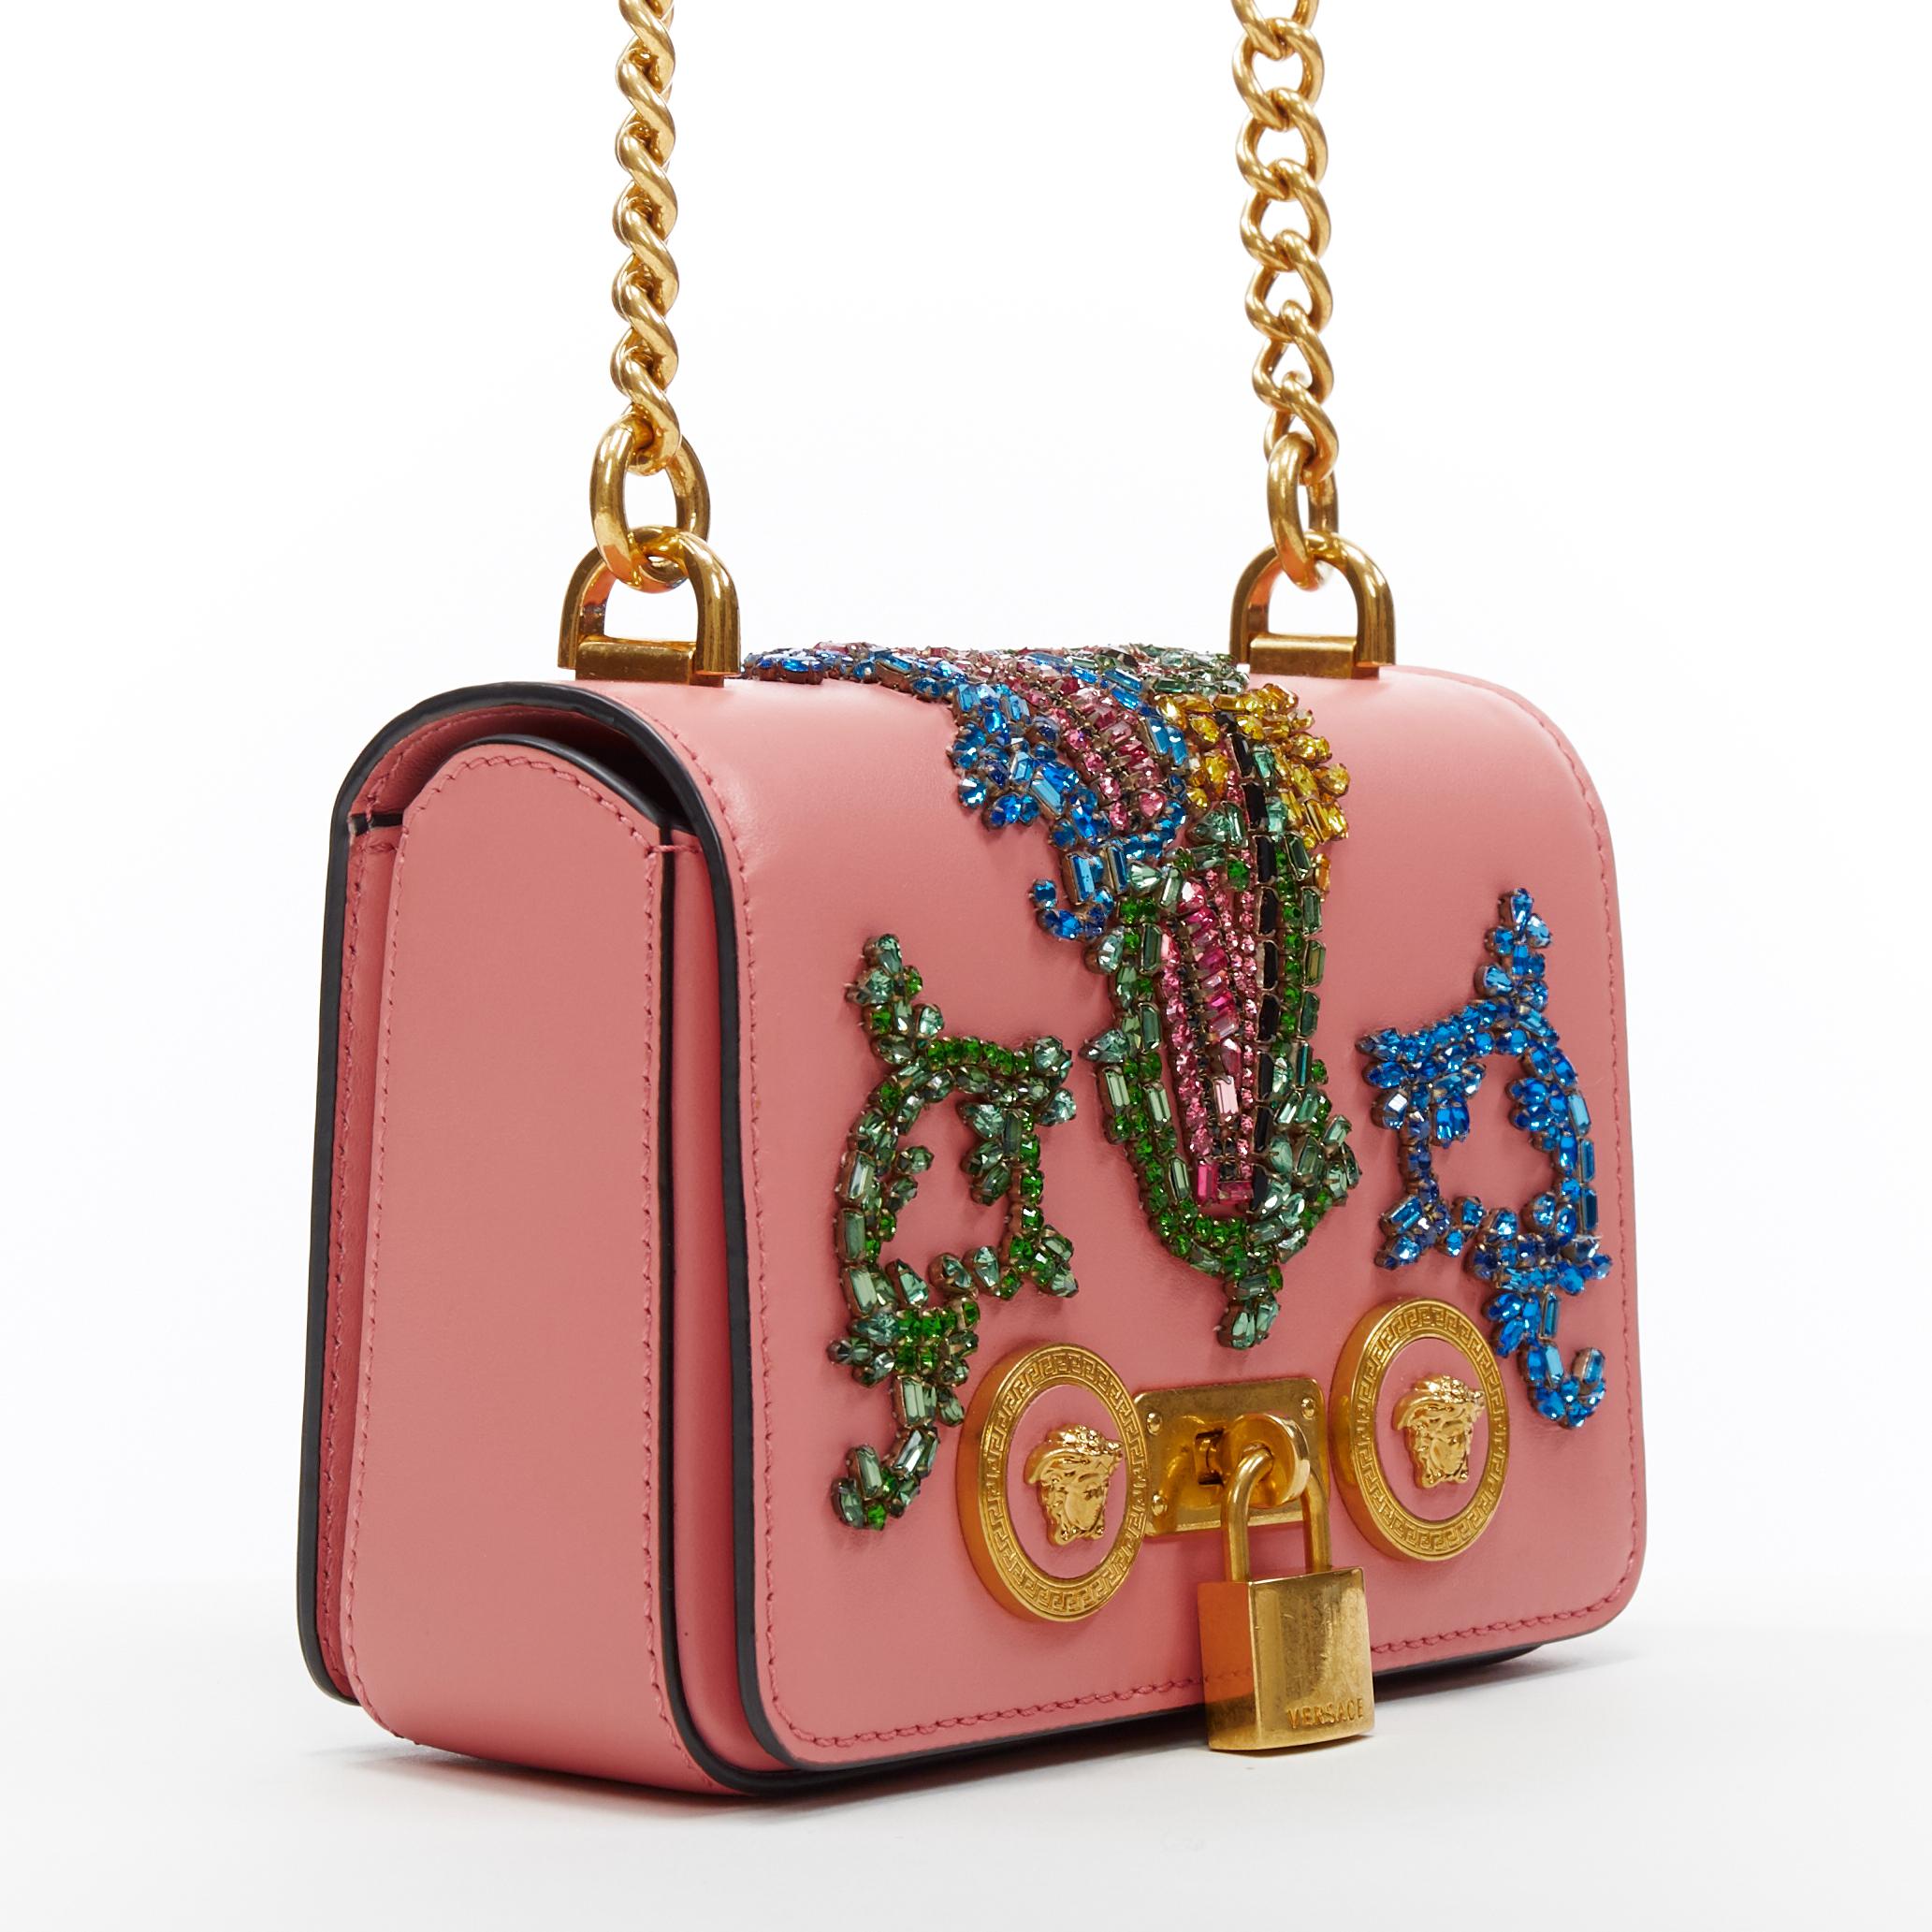 new VERSACE Mini Icon pink baroque Virtus V crystal embellished shoulder bag
Brand: Versace
Designer: Donatella Versace
Collection: 2019
Model Name / Style: Mini Icon
Material: Leather
Color: Pink
Pattern: Abstract
Closure: Turnlock
Lining material: